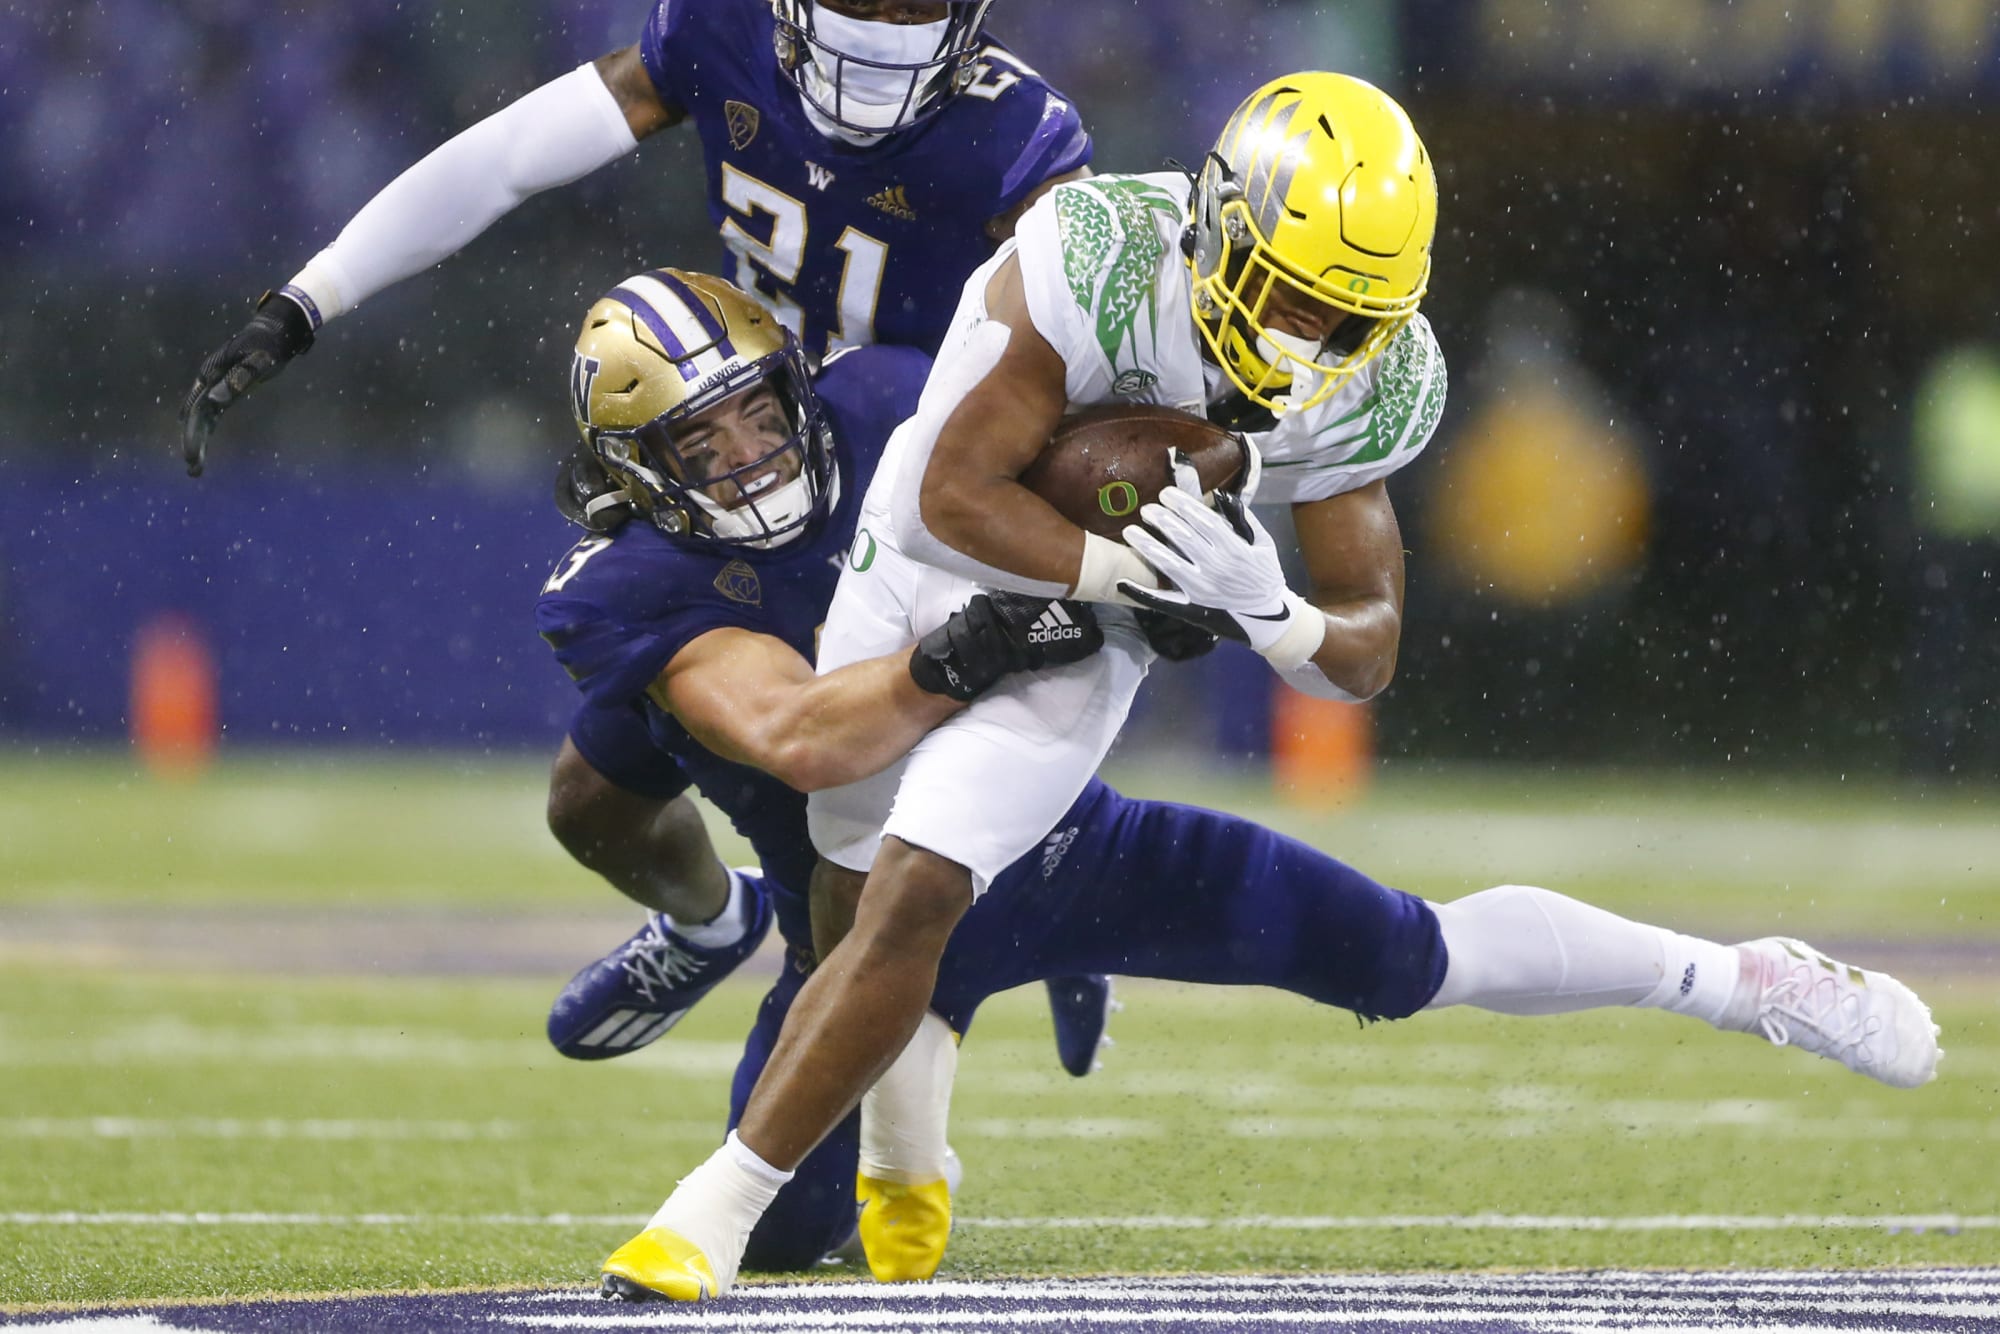 Oregon Football Waytooearly gamebygame predictions for 2022